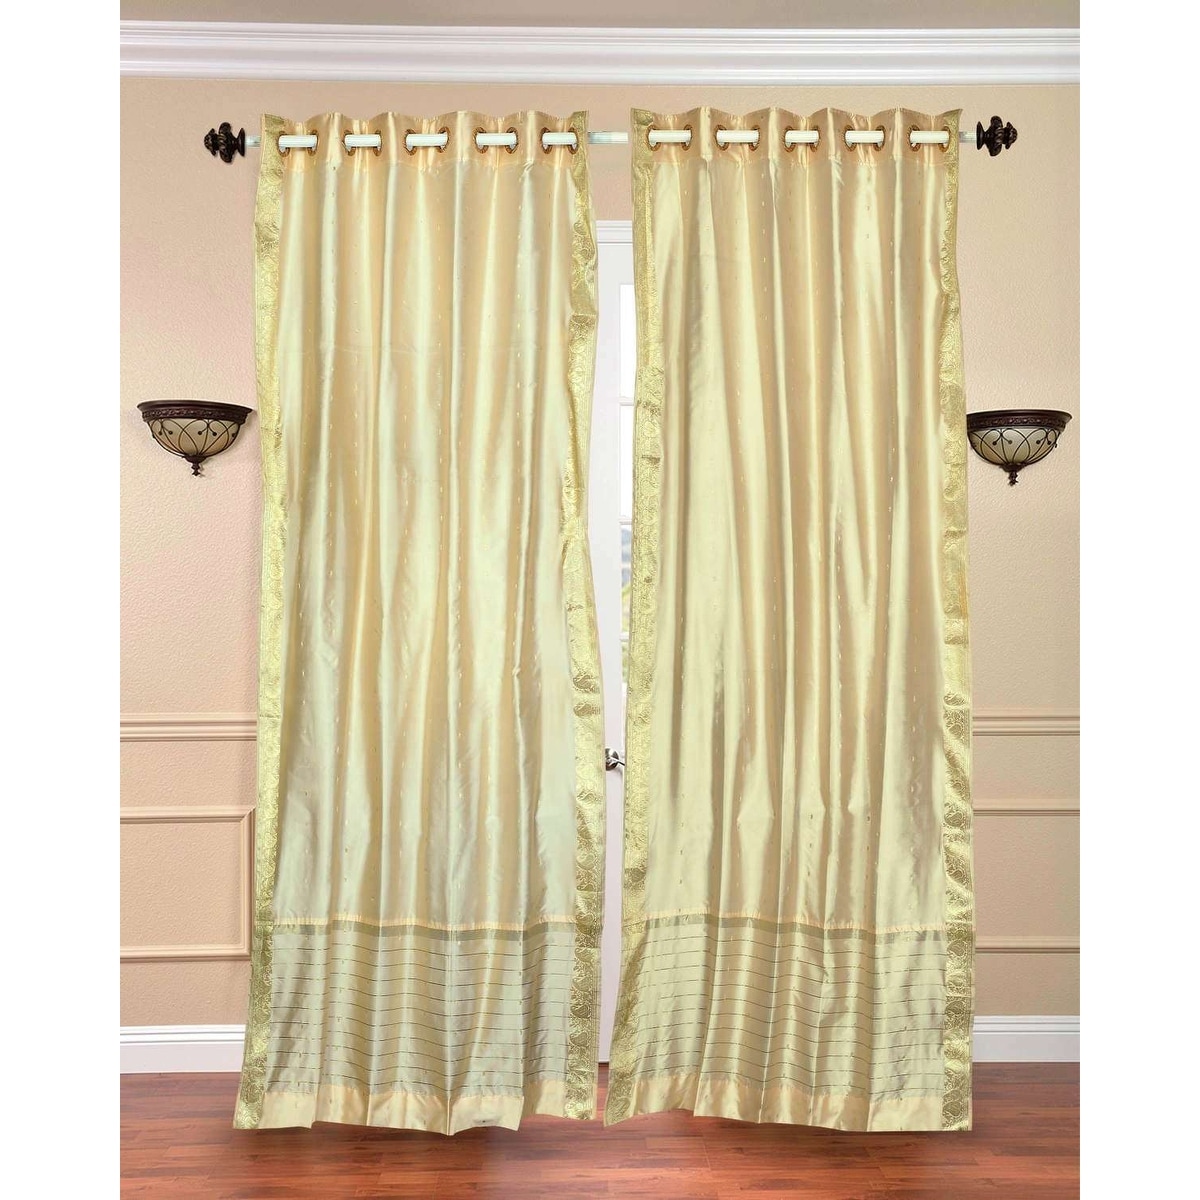 Drop Cloth Macrame Solid Cotton Light Filtering Ring Top Curtain Panel with  Fringe Valance, Linen, 50 x 84 - Walmart.com